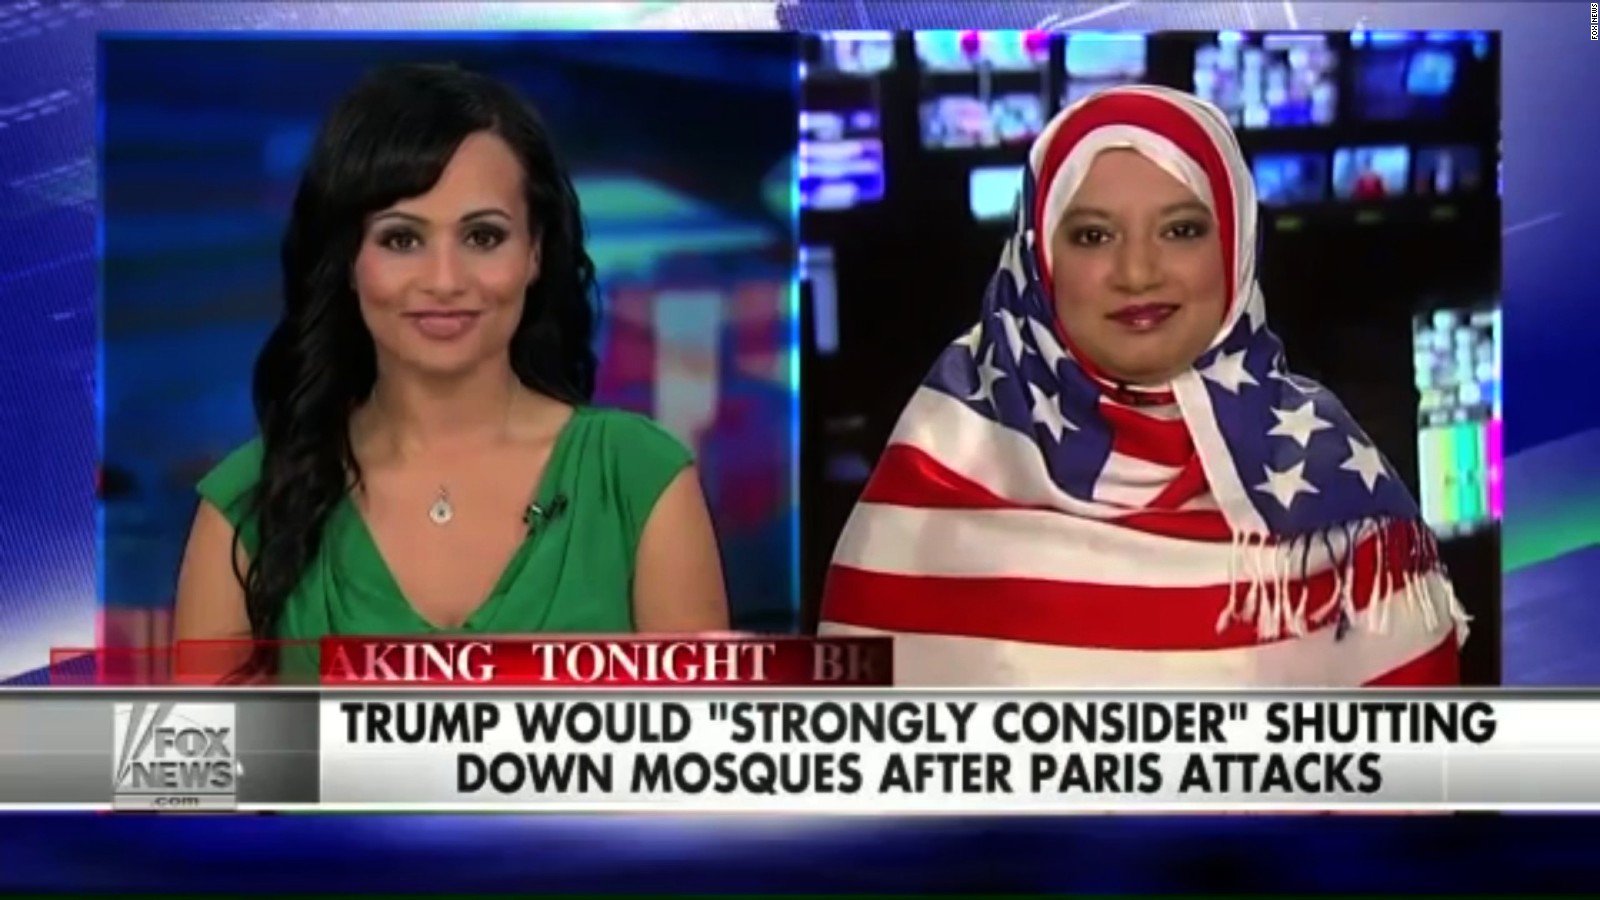 WATCH: CNN reporter says American women should wear an Islamic veil to show respect and solidarity with Islam and Muslims .